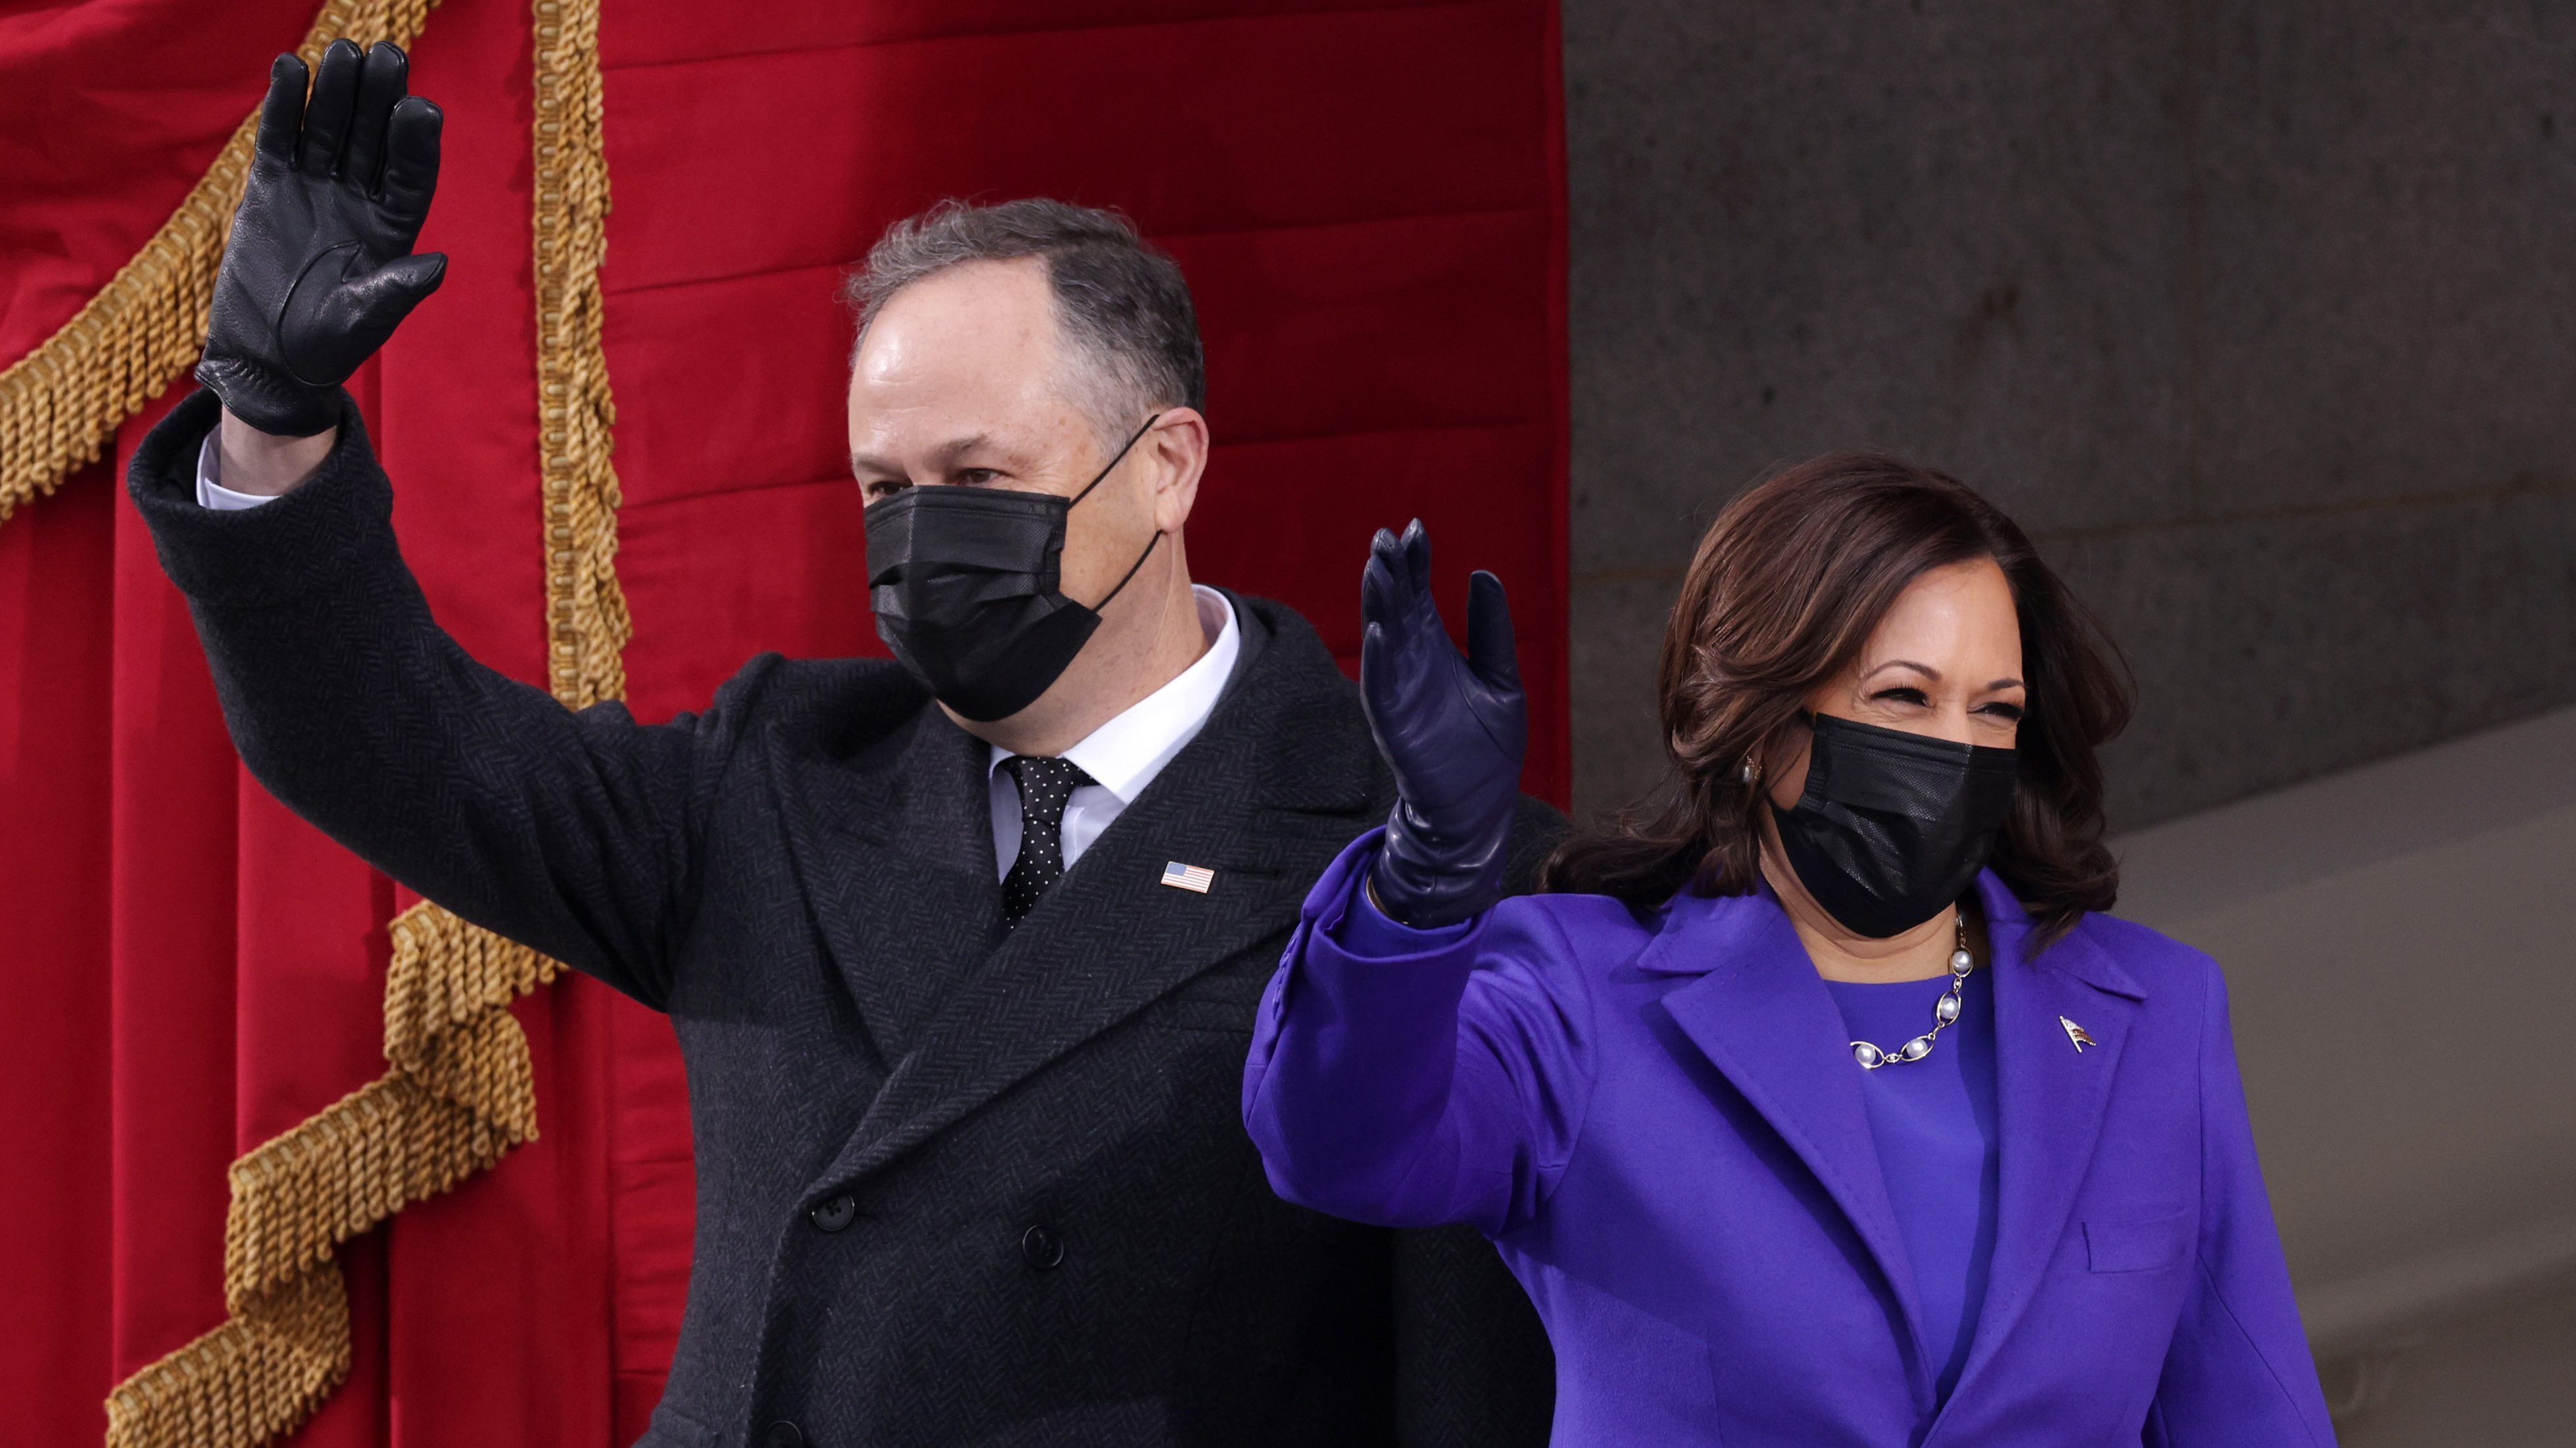 Vice President-elect Kamala Harris and husband Doug Emhoff arrive to the inauguration of Joe Biden on the West Front of the U.S. Capitol, Jan. 20, 2021, in Washington, D.C. (Alex Wong/Getty Images)